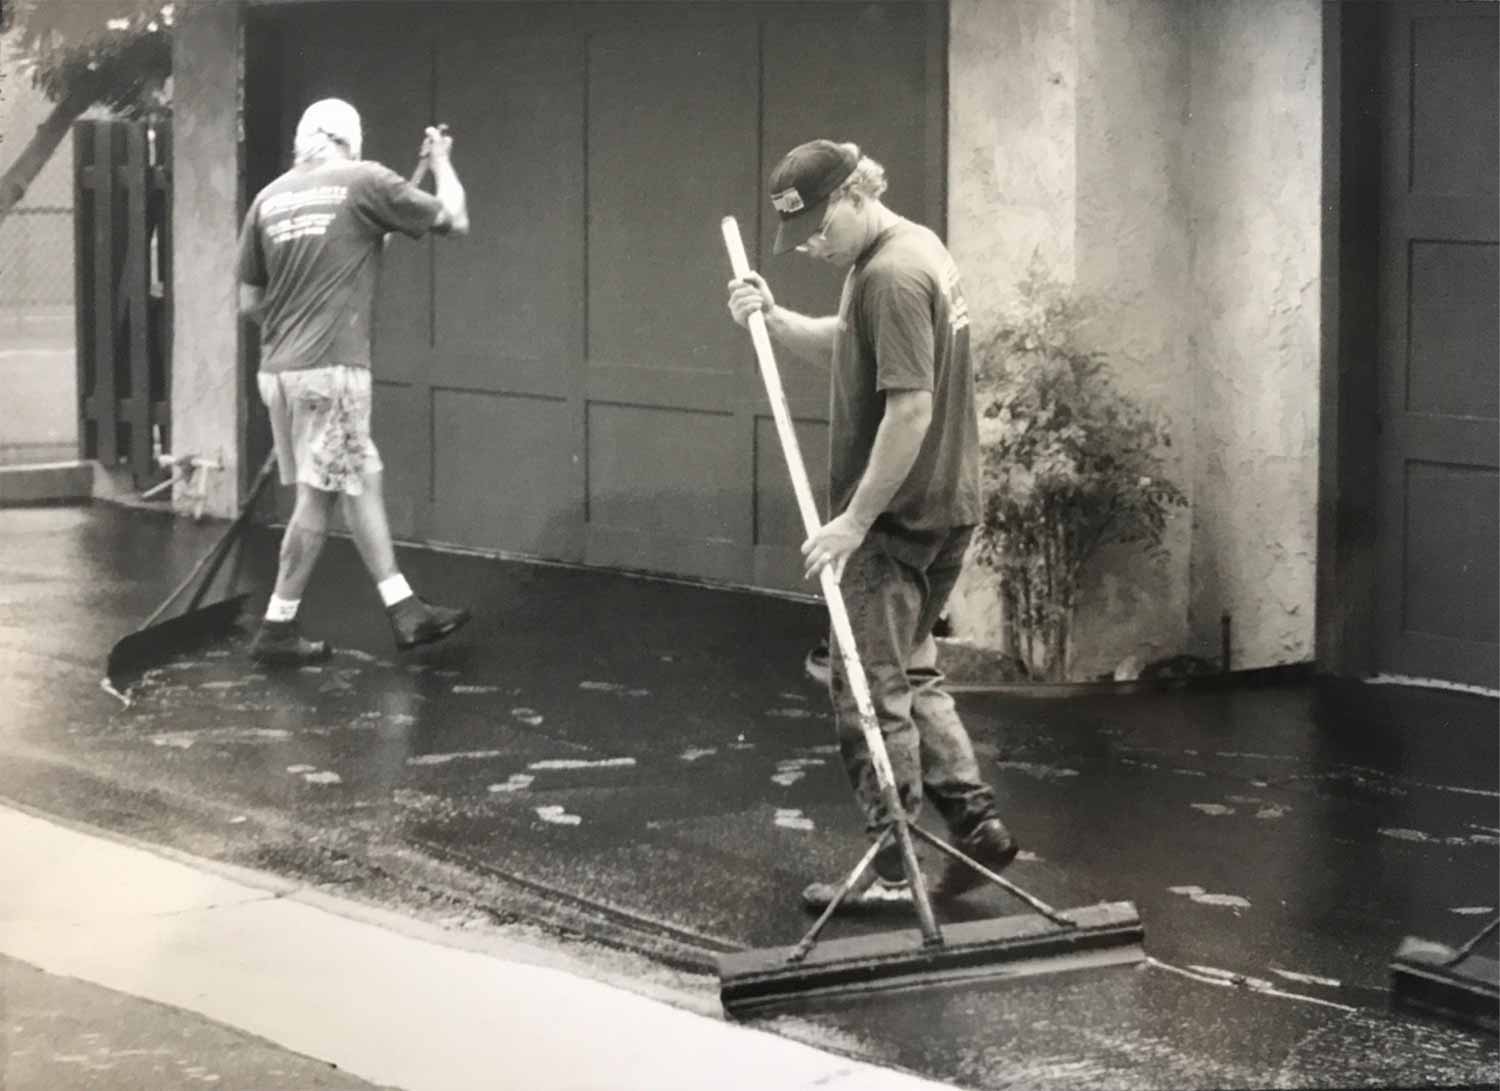 Gordon and Pat Reardon sealcoating in Northridge - See how Gordon’s K-Swiss tennis shoes went from paving to sealcoating, to the trash can 1